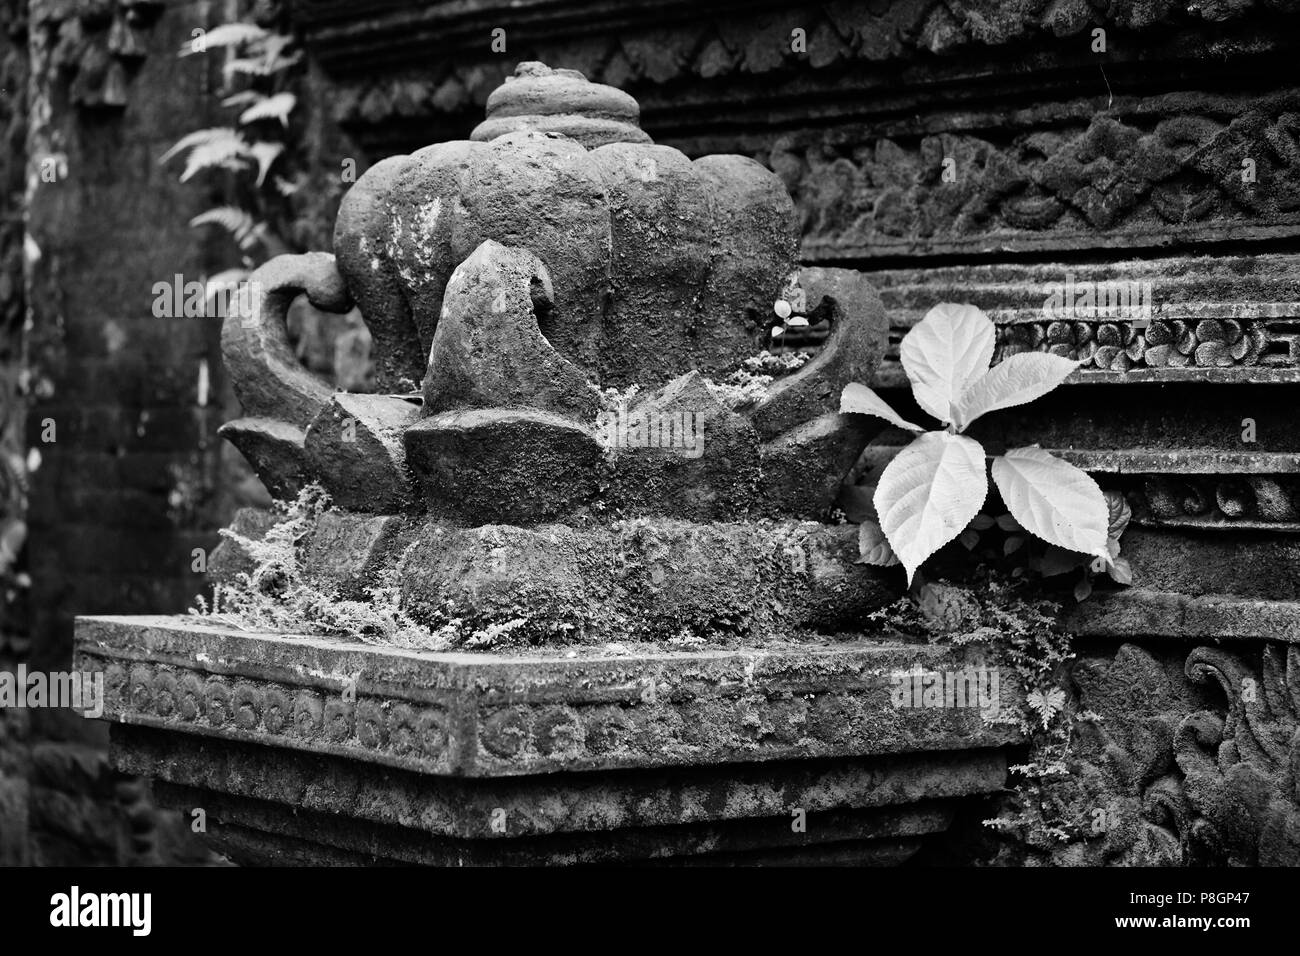 A stone carved LOTUS at the Hindu temple PURA NAGA SARI is found in THE MONKEY FOREST PARK - UBUD, BALI, INDONESIA Stock Photo